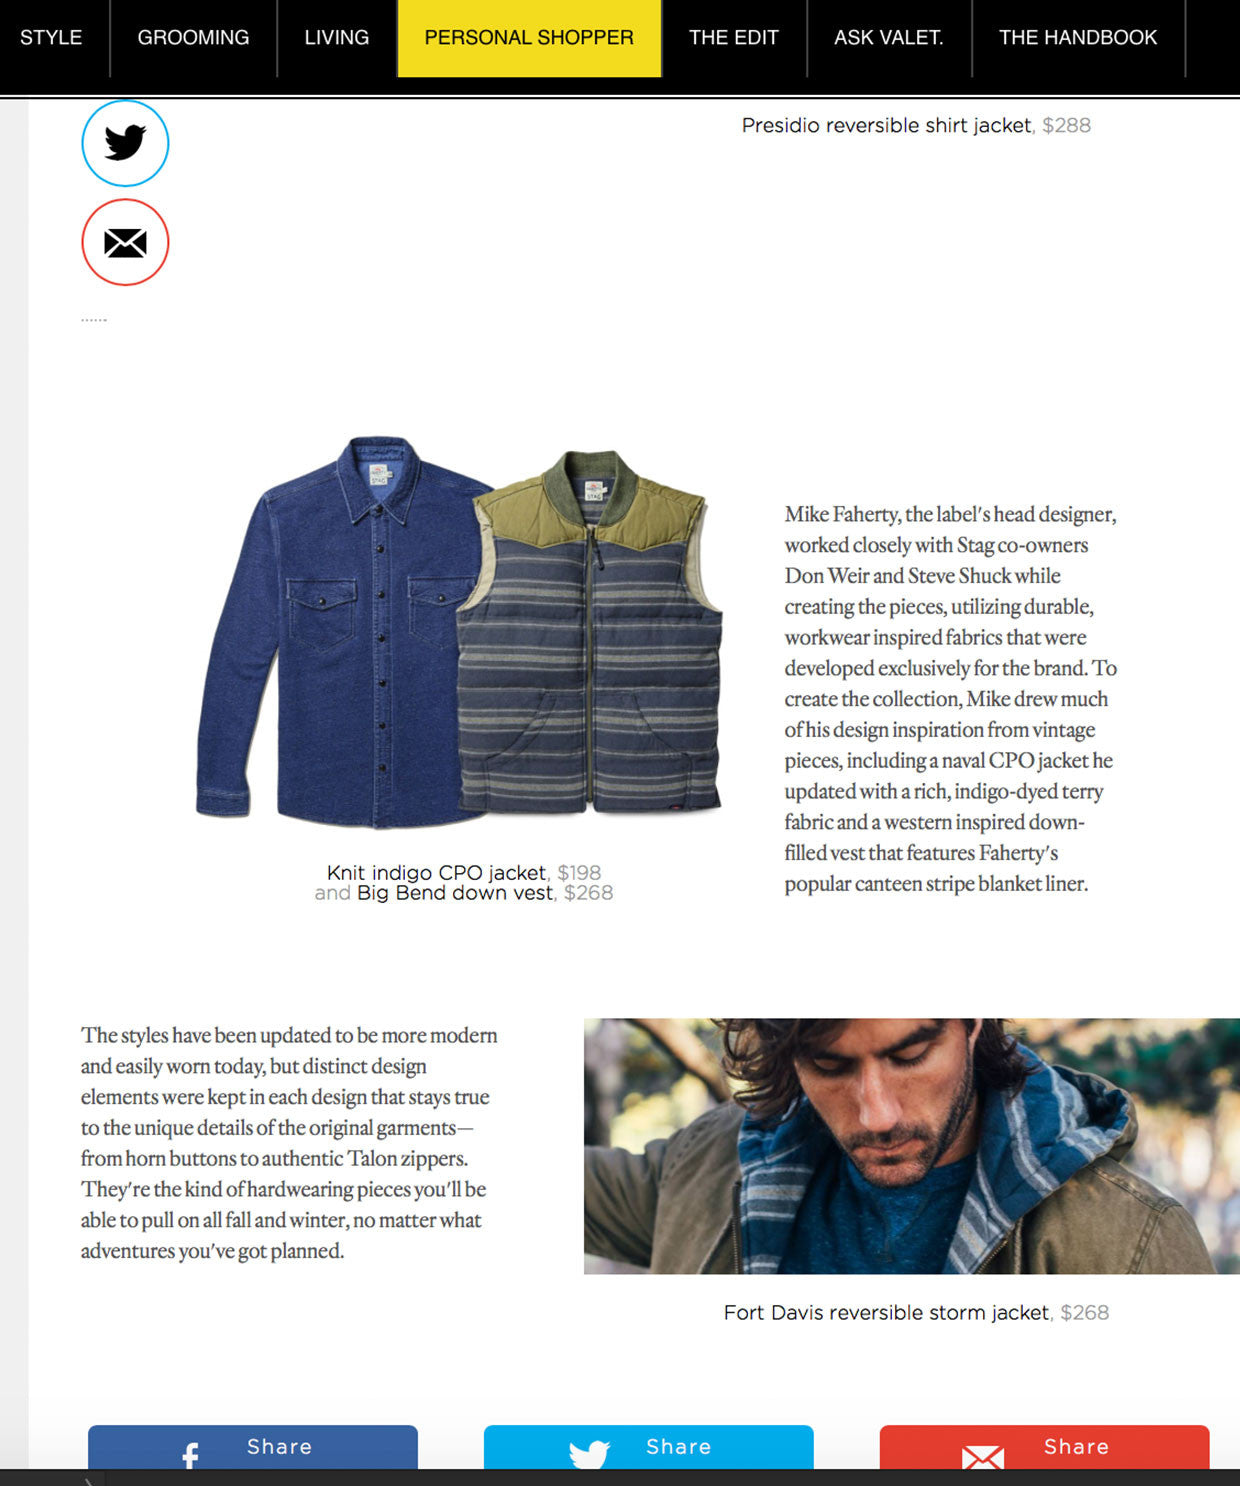 Check Out Our Press | Faherty Brand